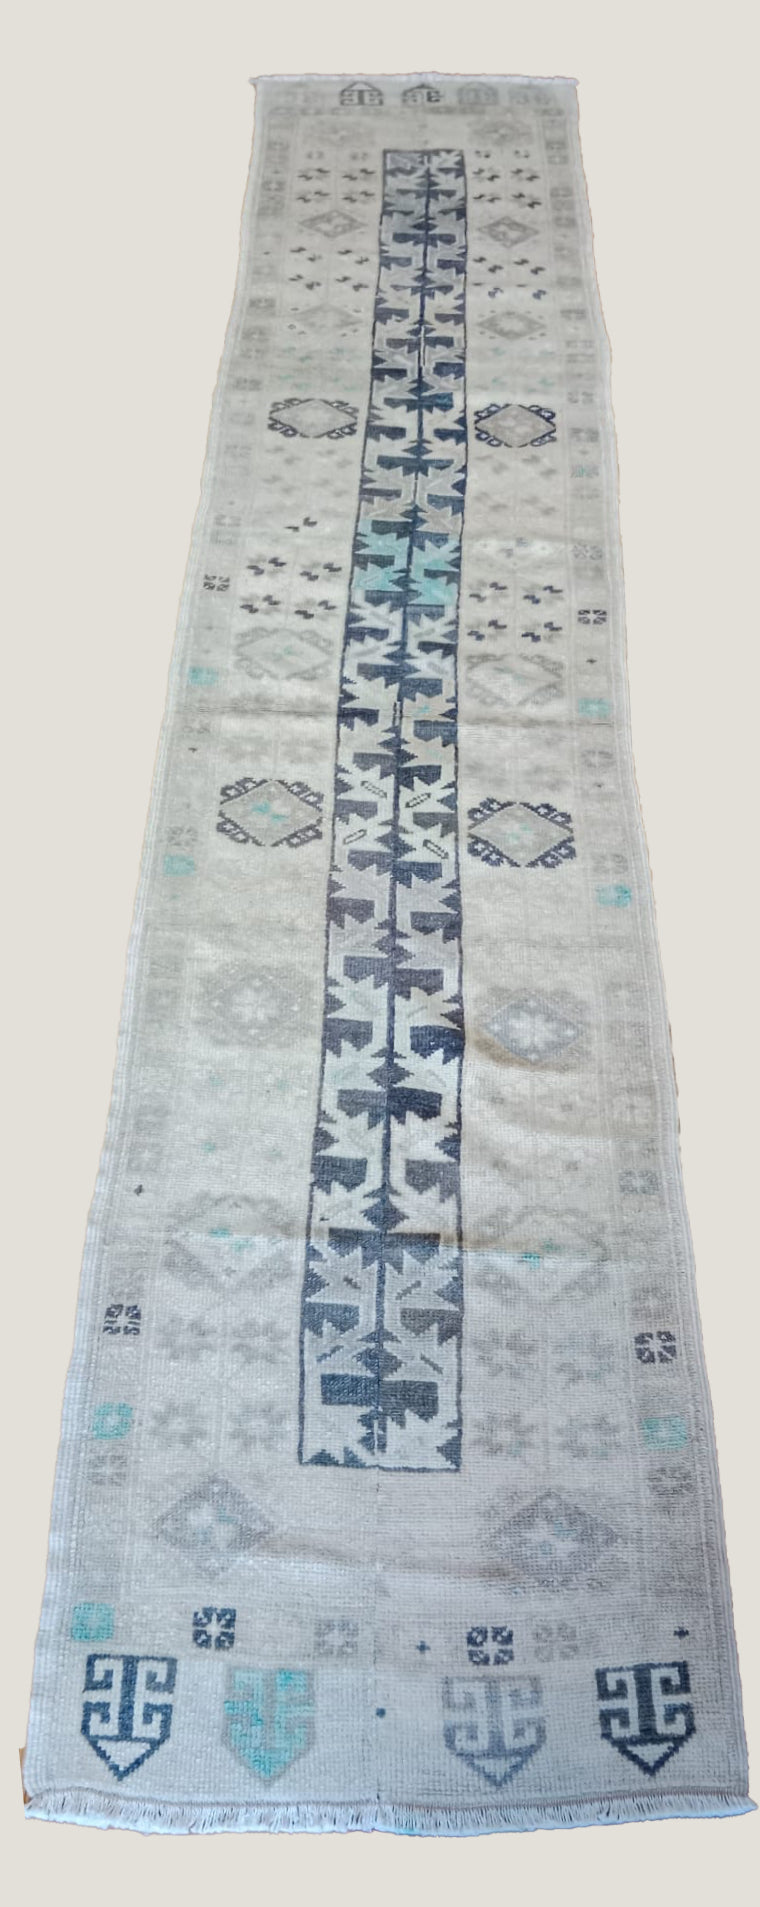 2x11 Vintage Central Antaolian Turkish Runner Rug | Double 'Eagle' Medallion Muted Colors | SKU 716